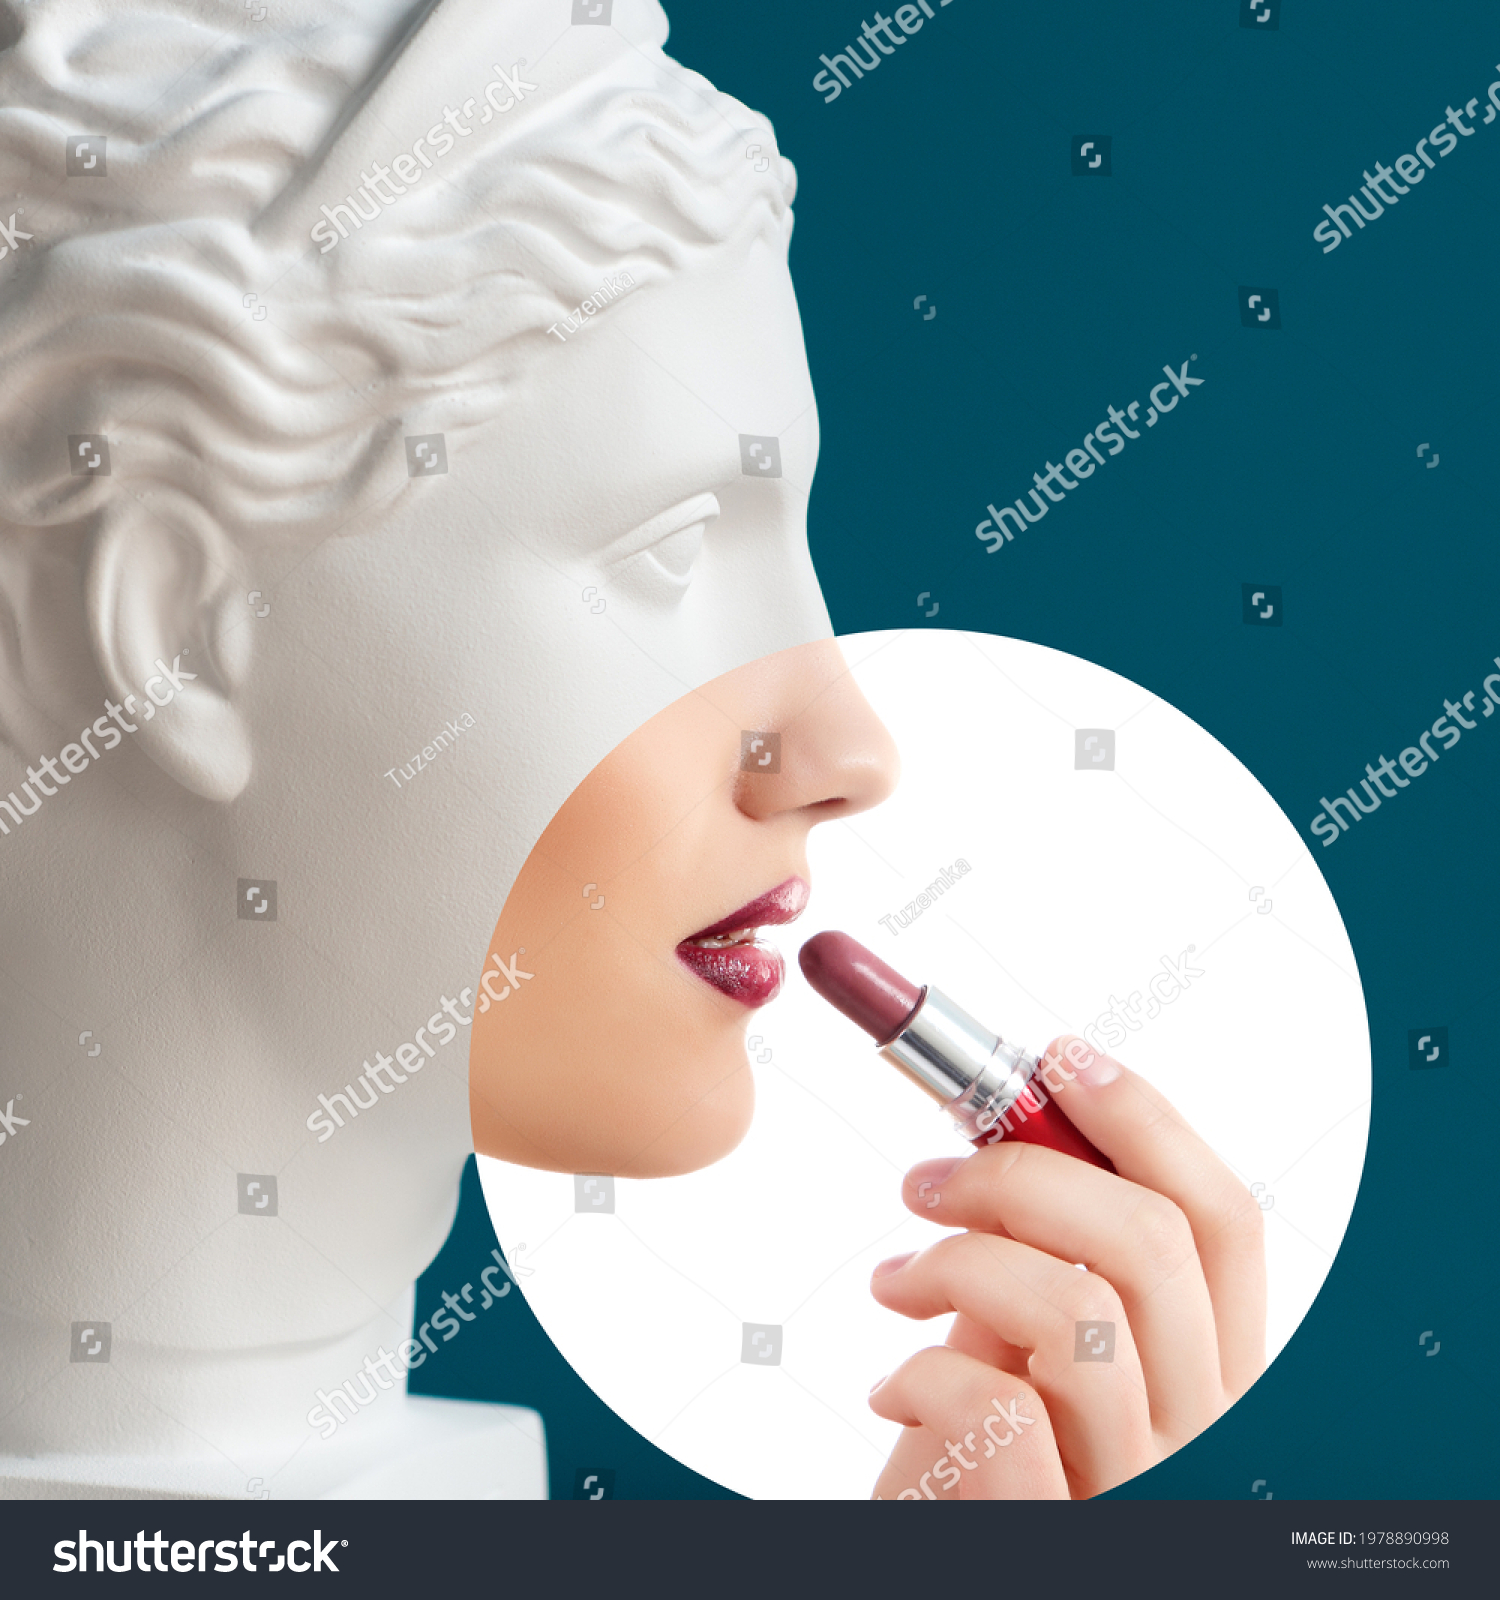 Contemporary collage of plaster statue head and young woman with lipstick in profile over deep blue background. Antiquity and modernity, beauty canons #1978890998